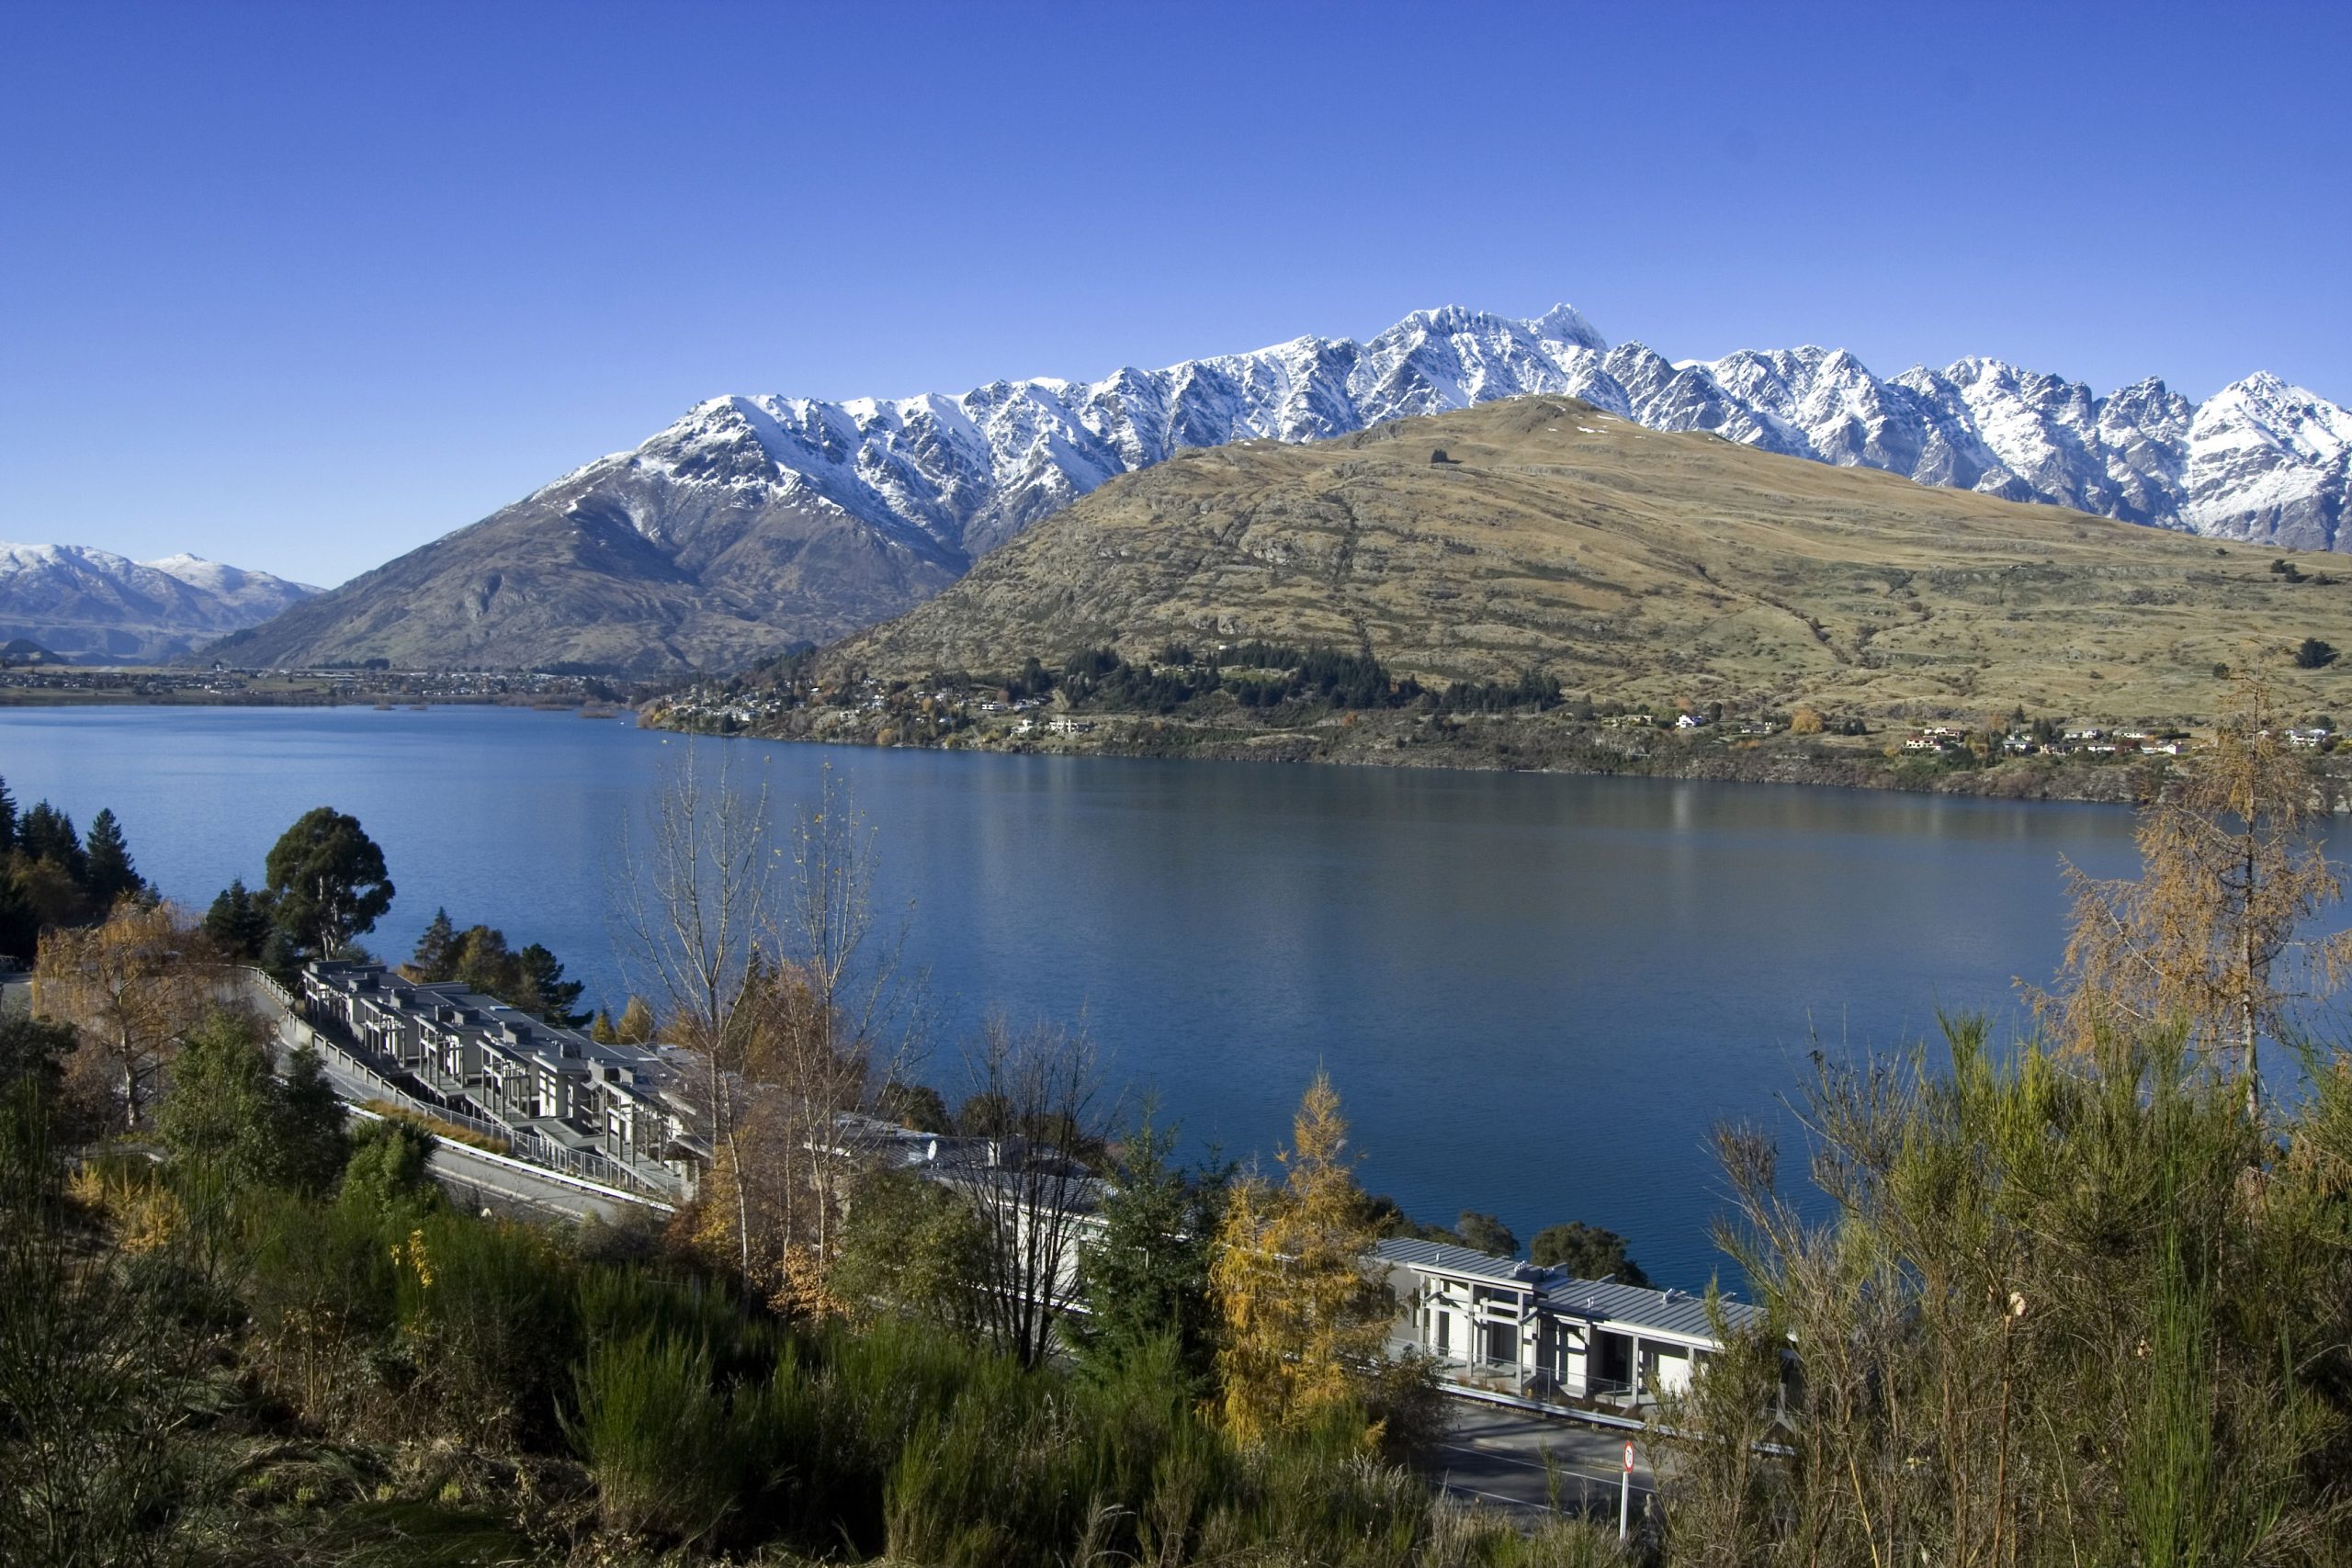 View from above The Rees Hotel Queenstown